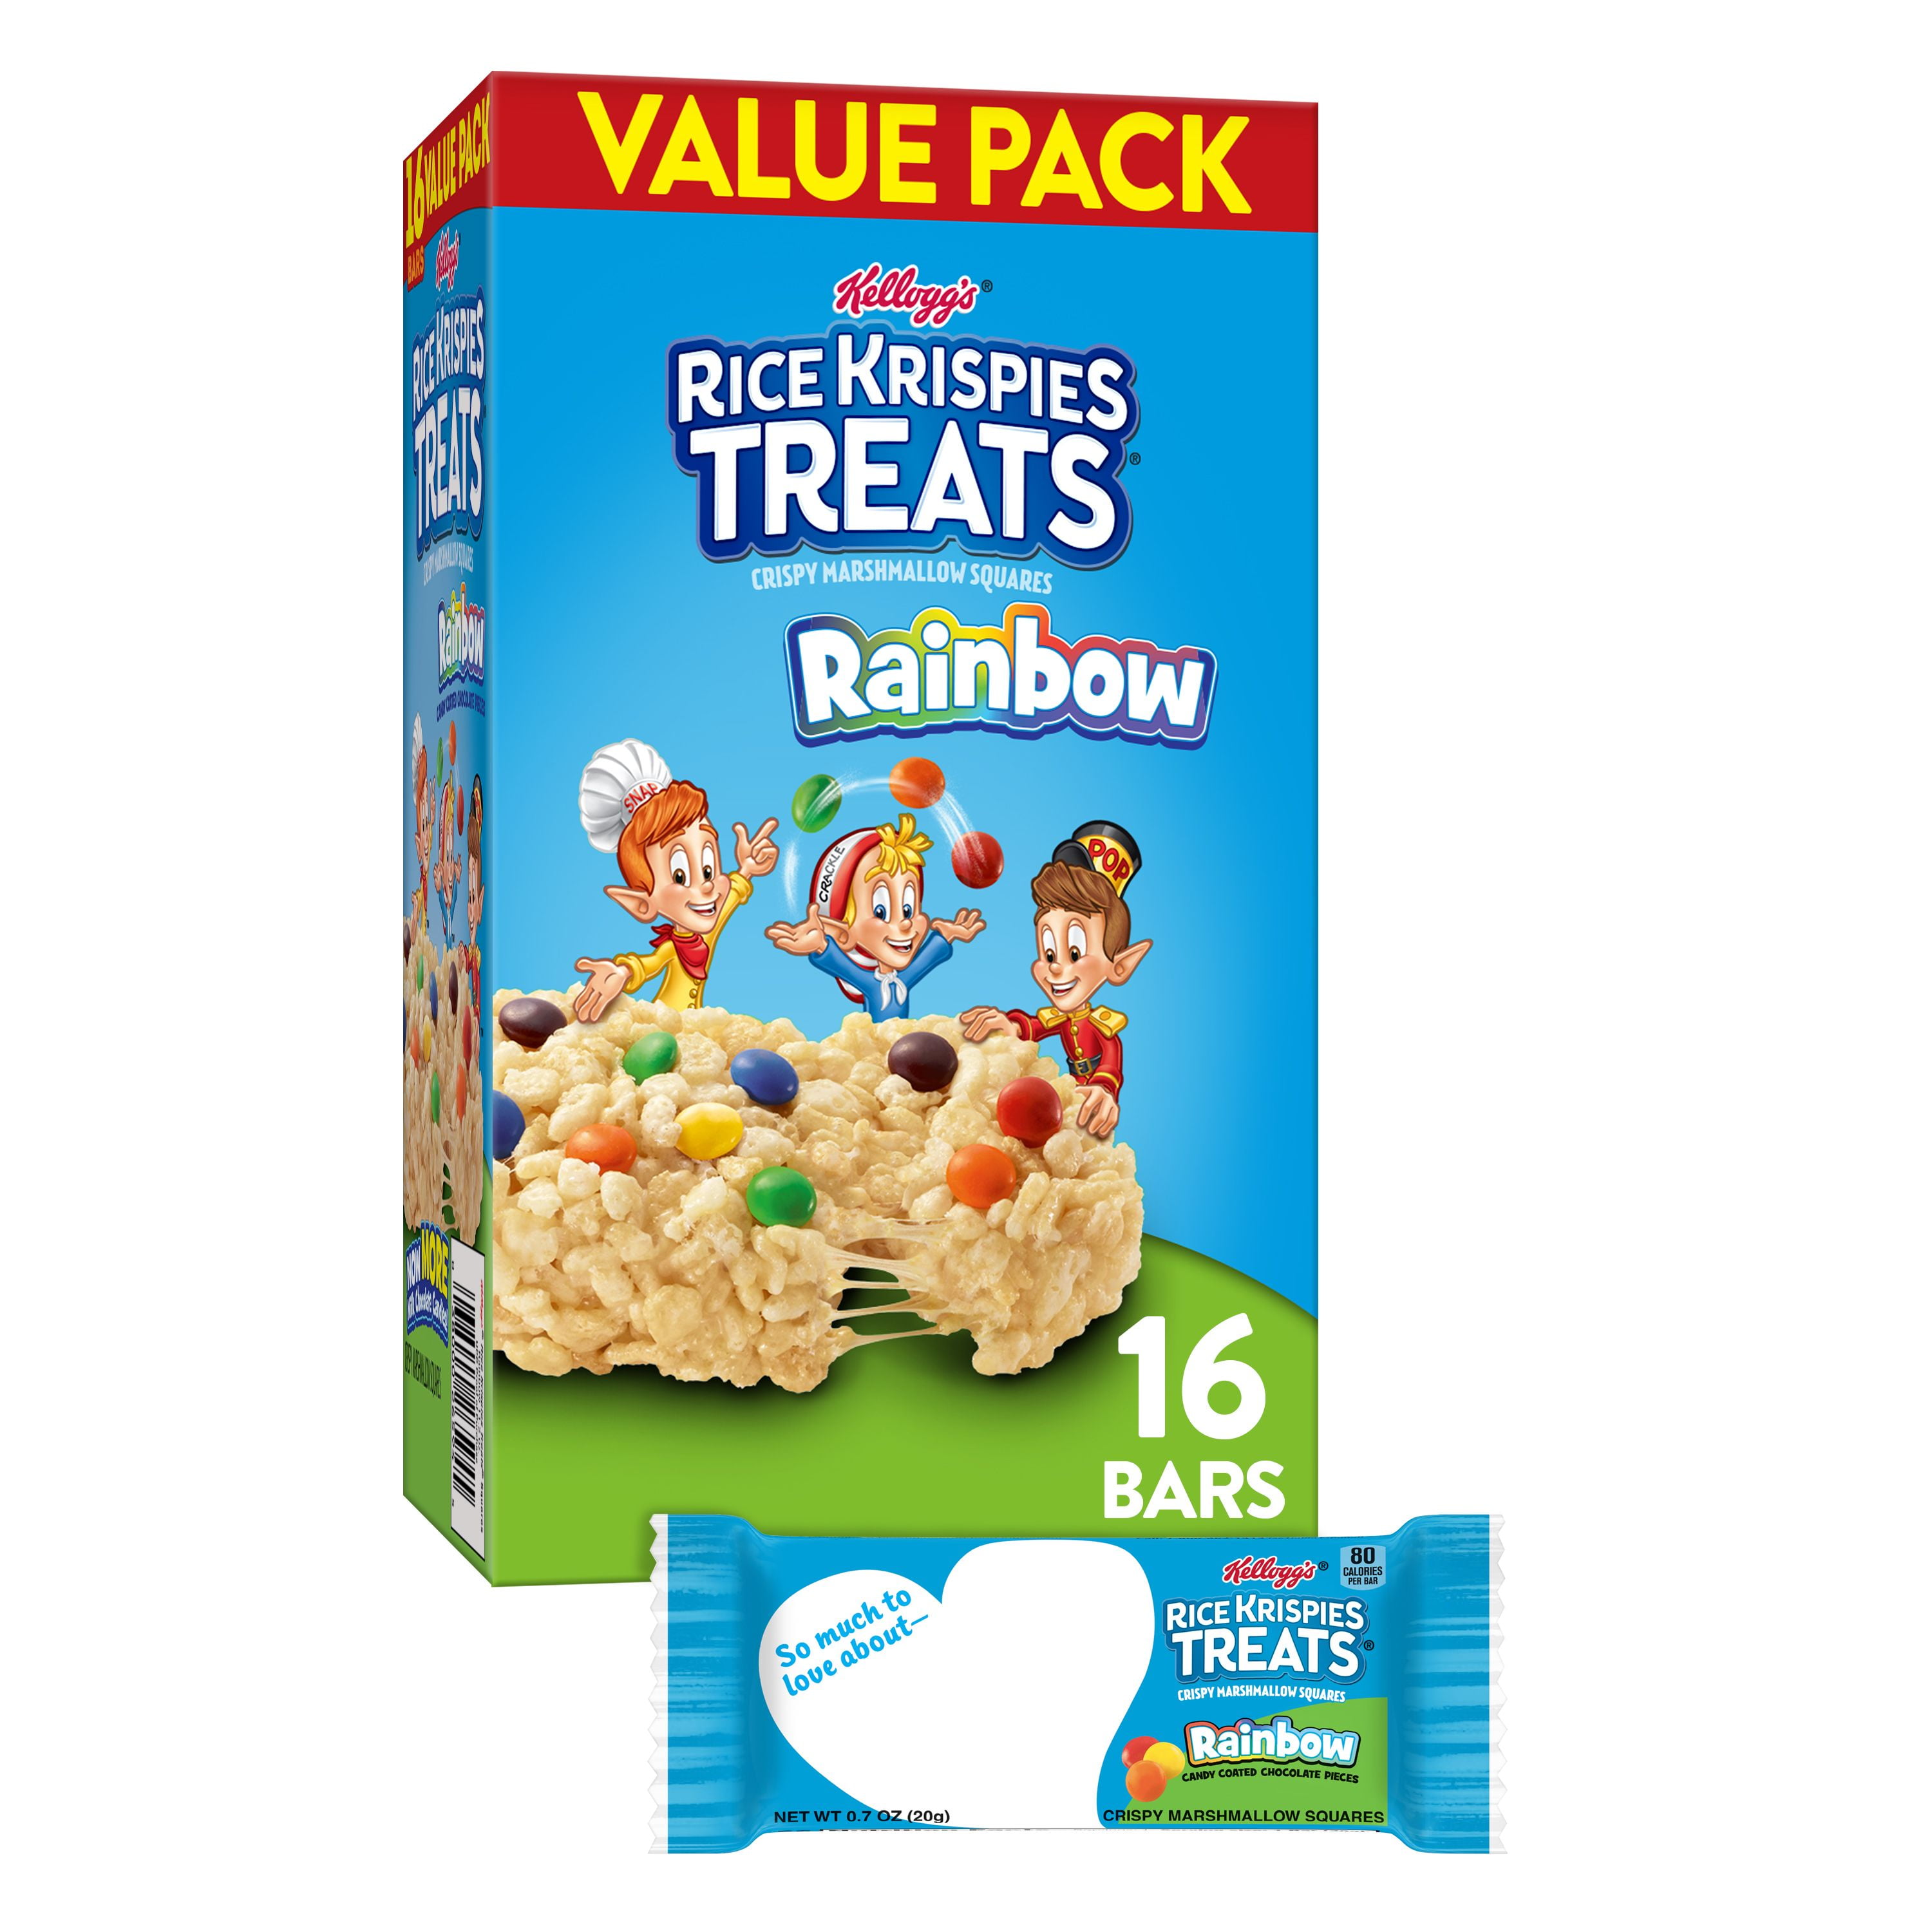 Rice Krispies Treats Rainbow Chewy Marshmallow Snack Bars, 11.2 oz, 16 Count